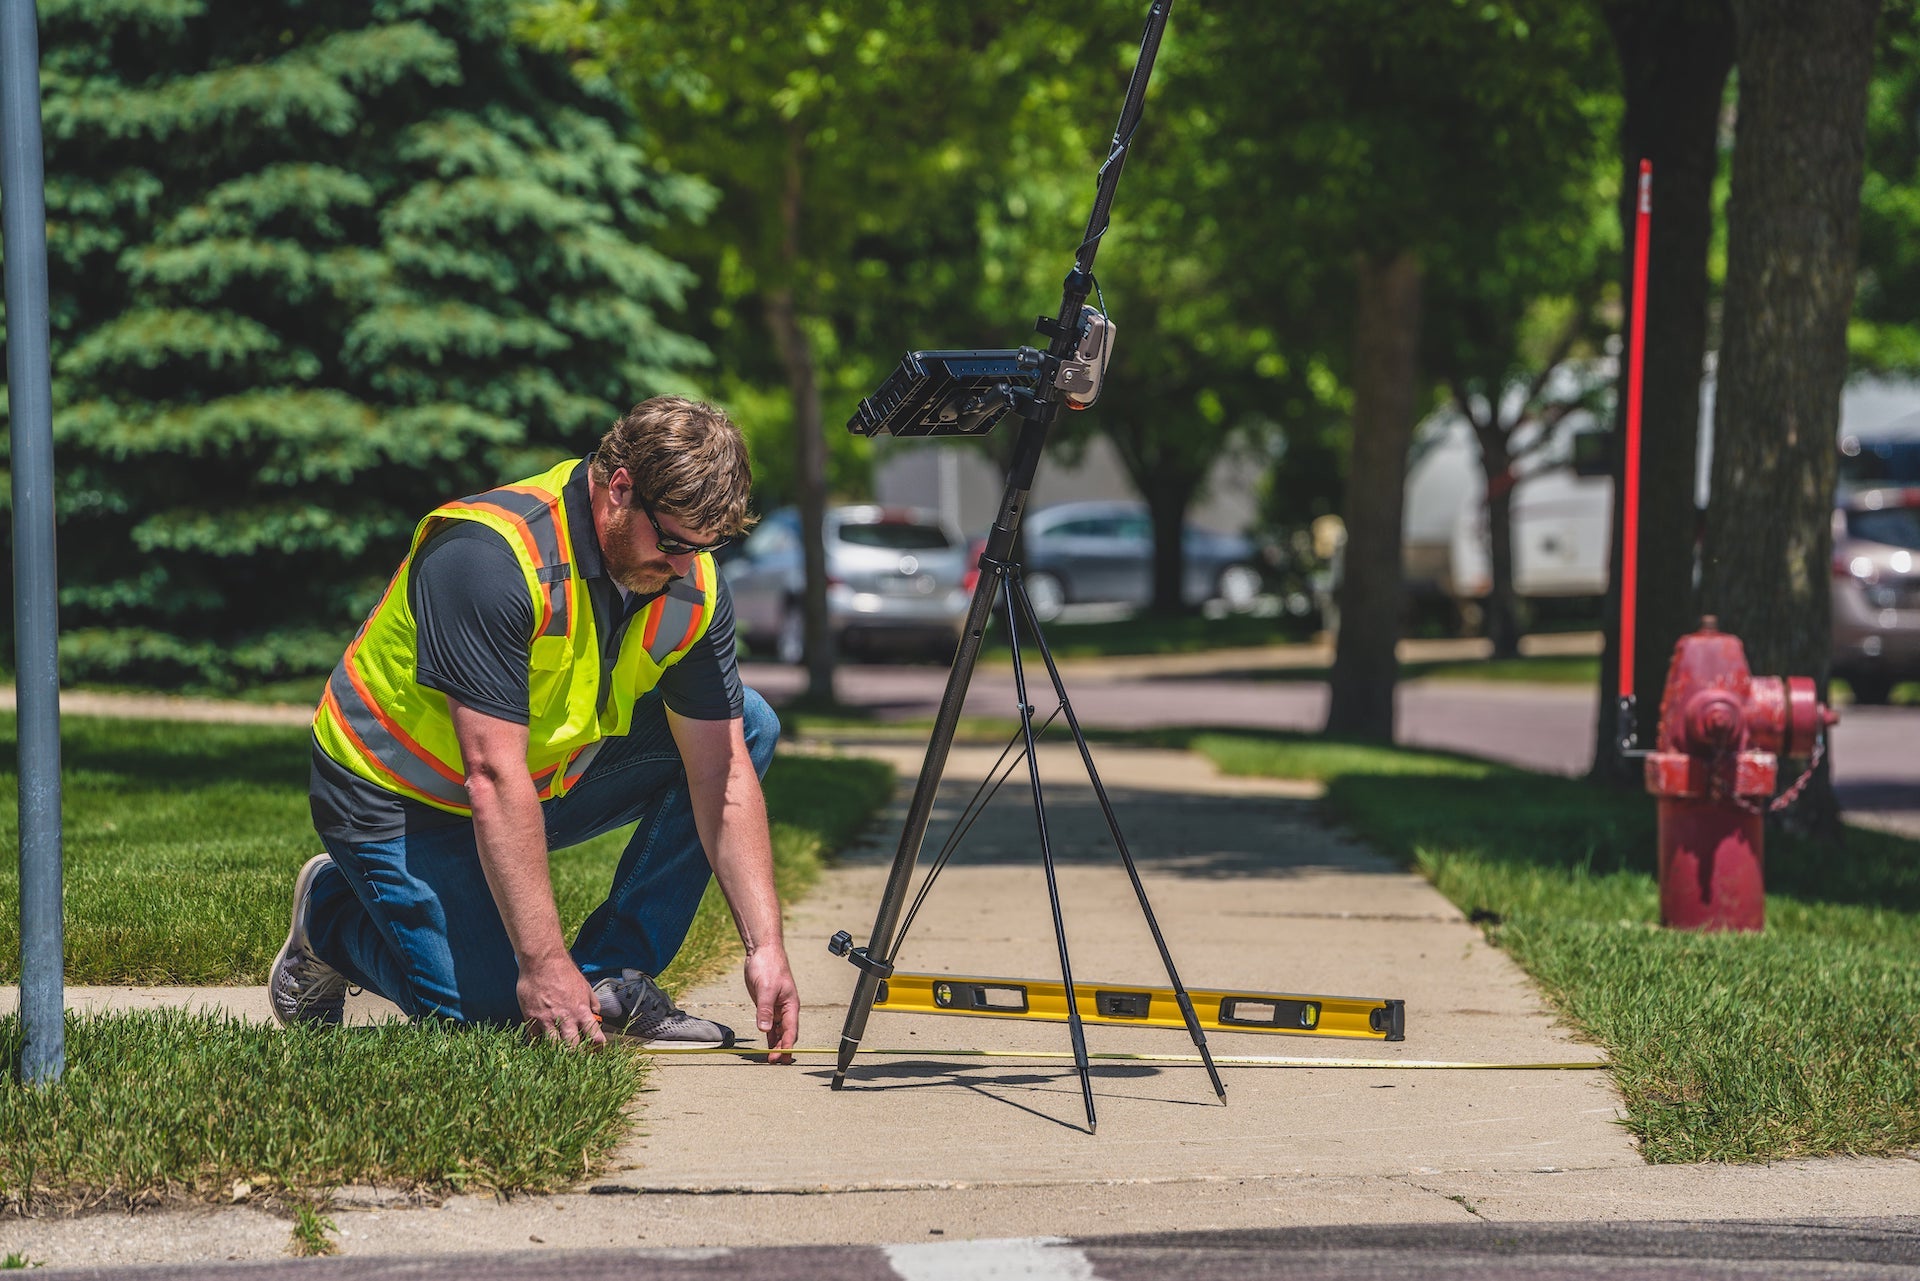 Bolton & Menk Use the Eos Arrow Gold to Collect Municipality Assets with High Accuracy